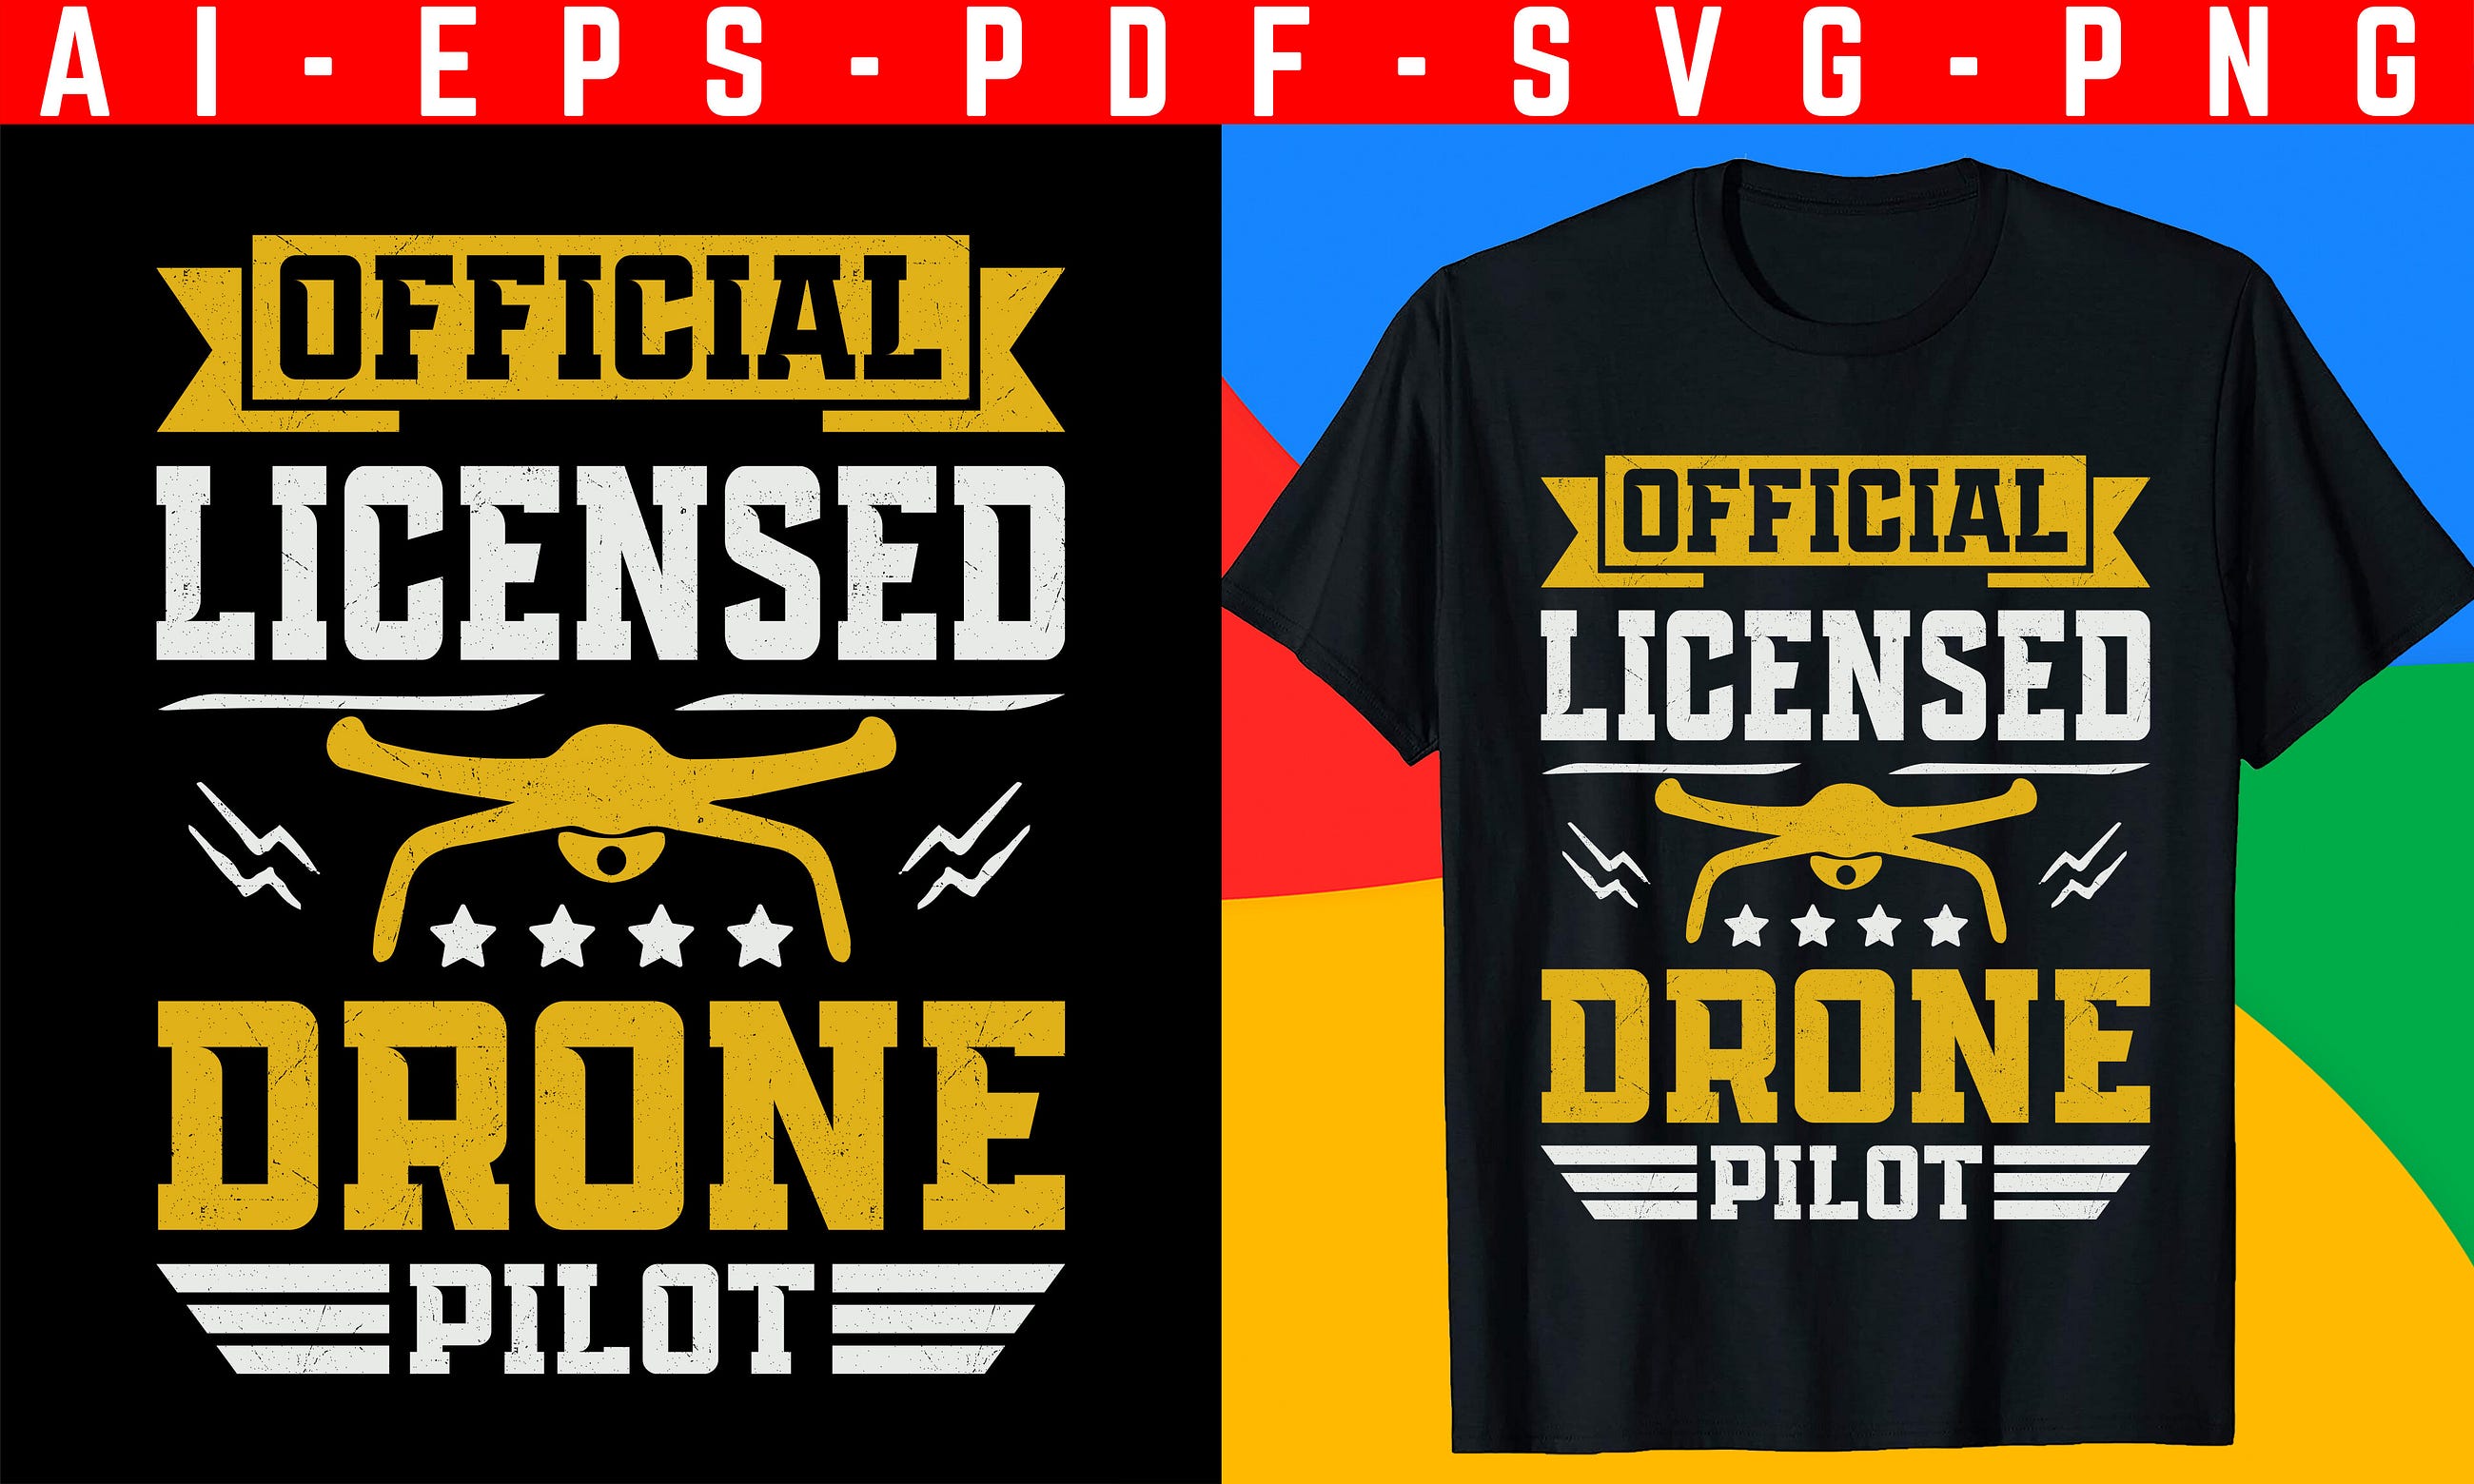 Official Licensed Drone Pilot Graphic Free